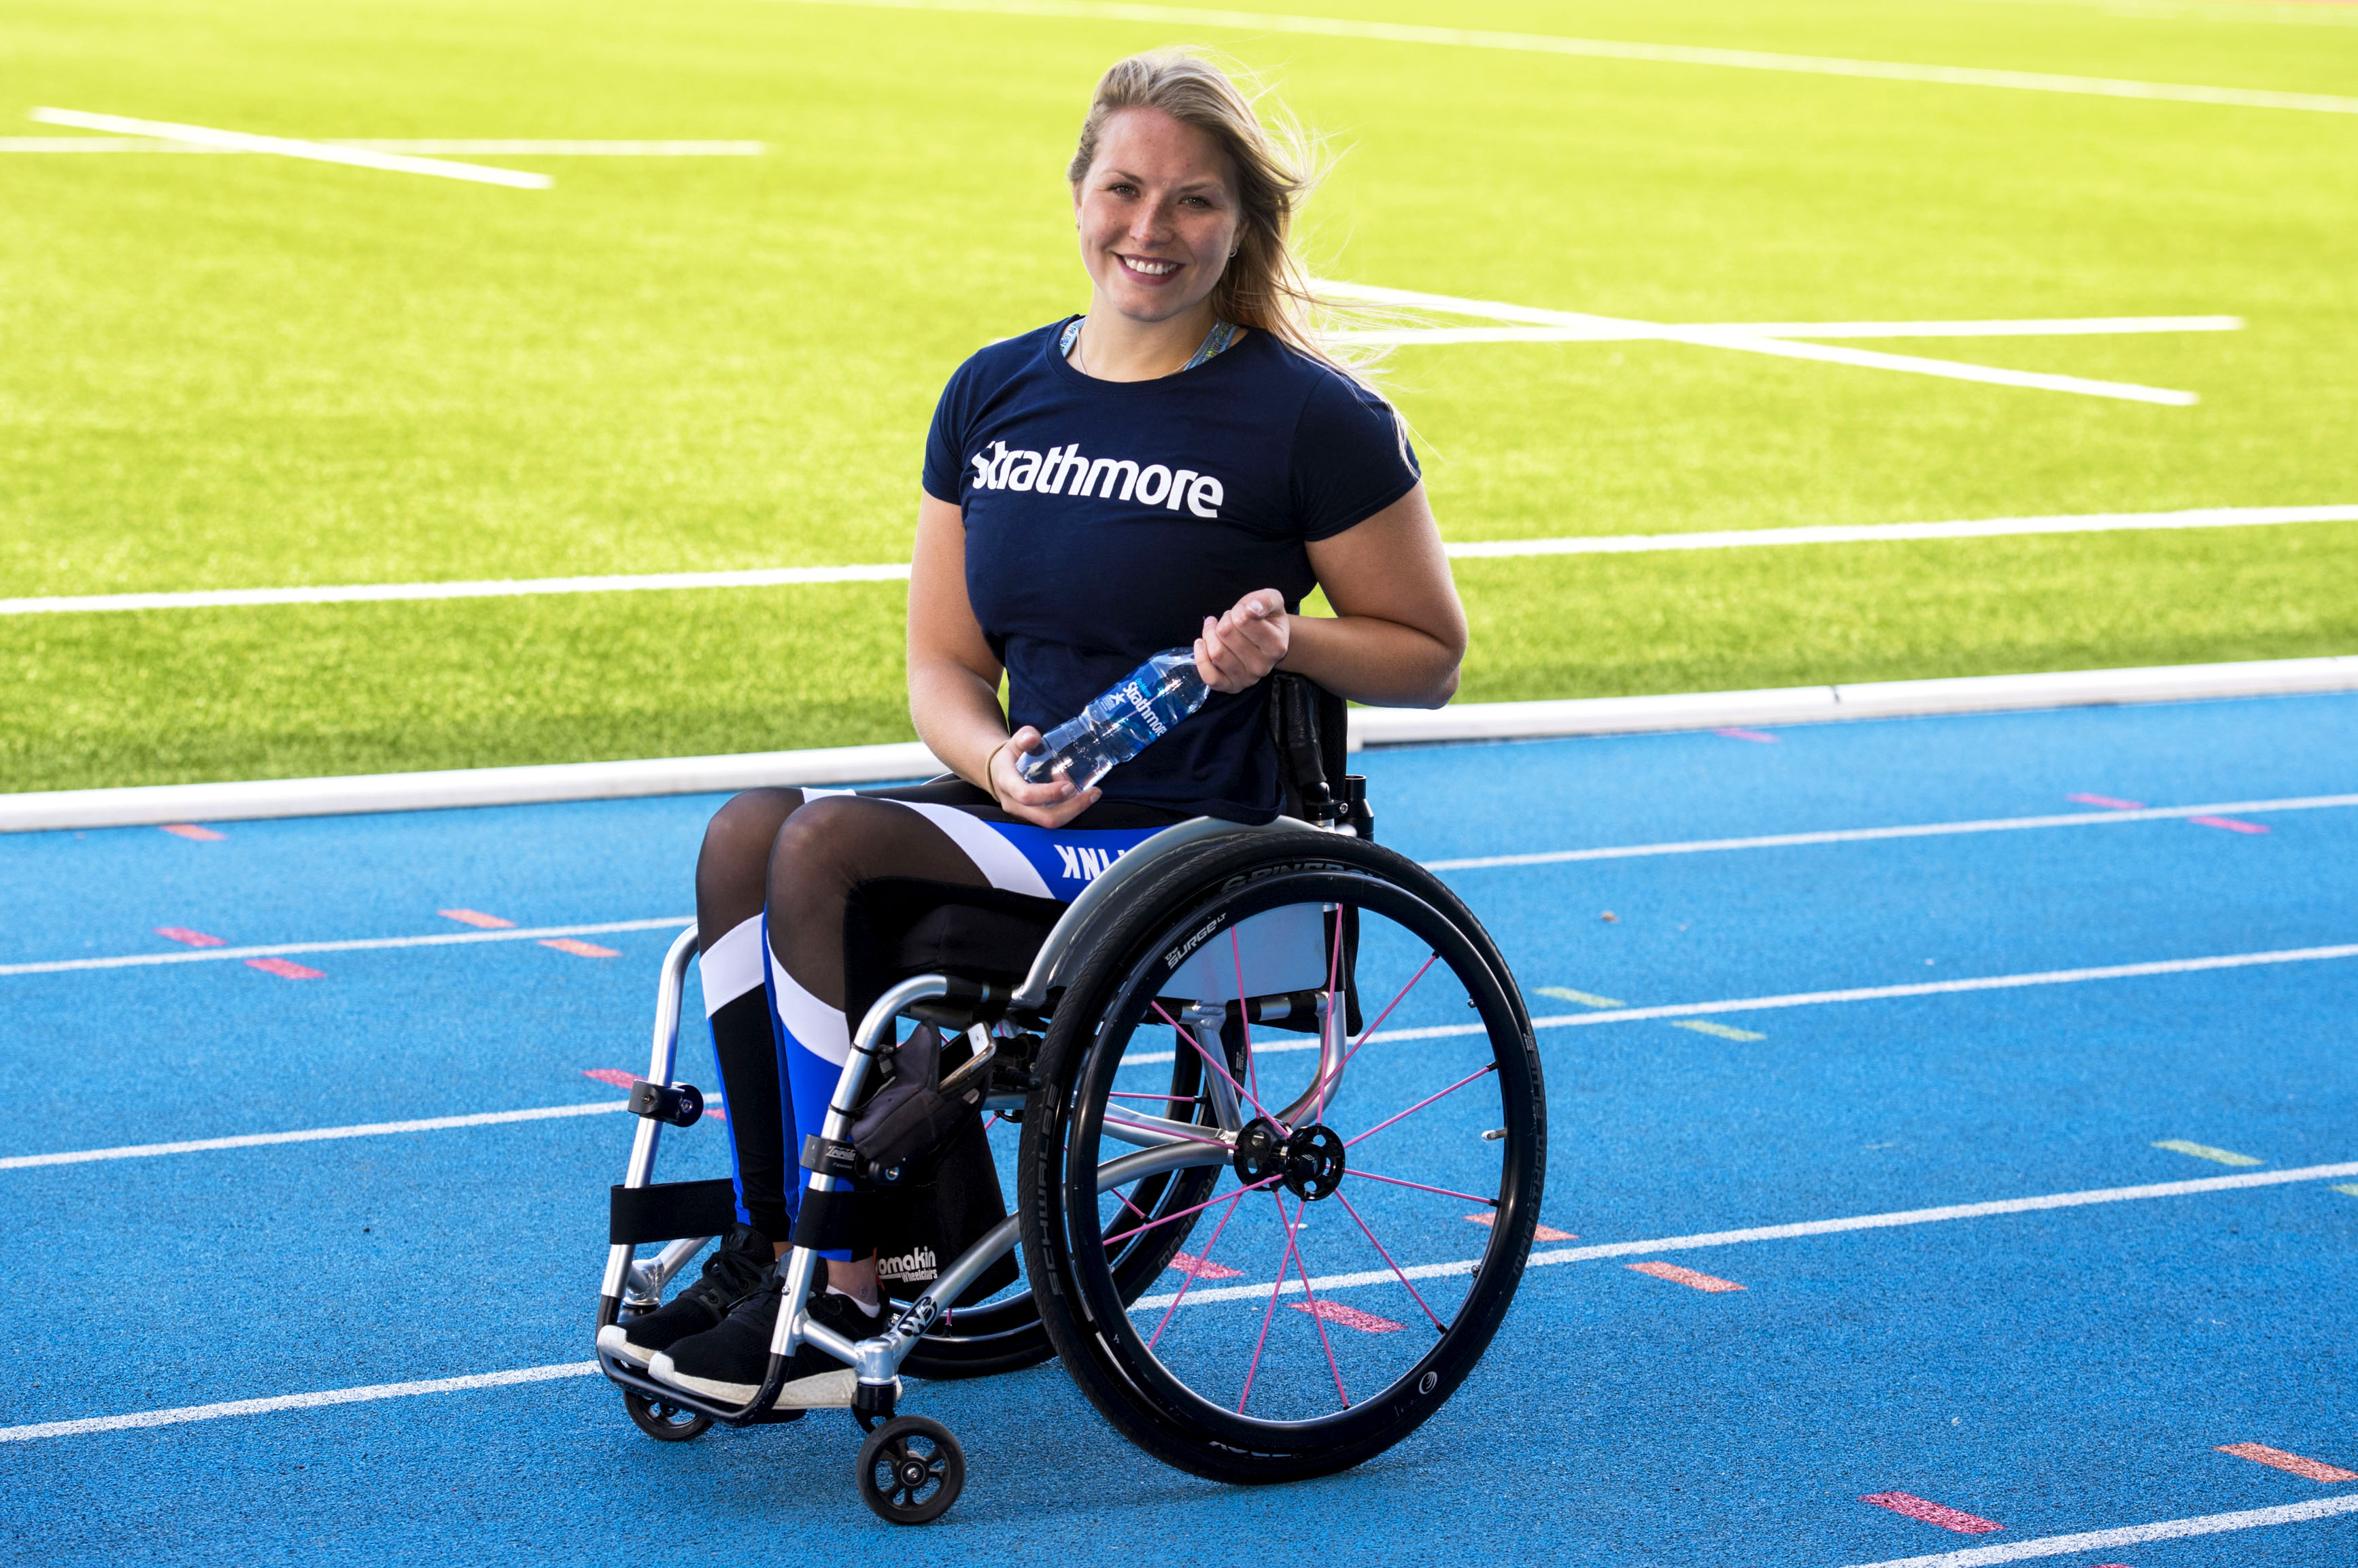 Samantha Kinghorn achieved silver in the T53 400m and Bronze in the T53 100m at the delayed Tokyo Paralympic games in 2021.